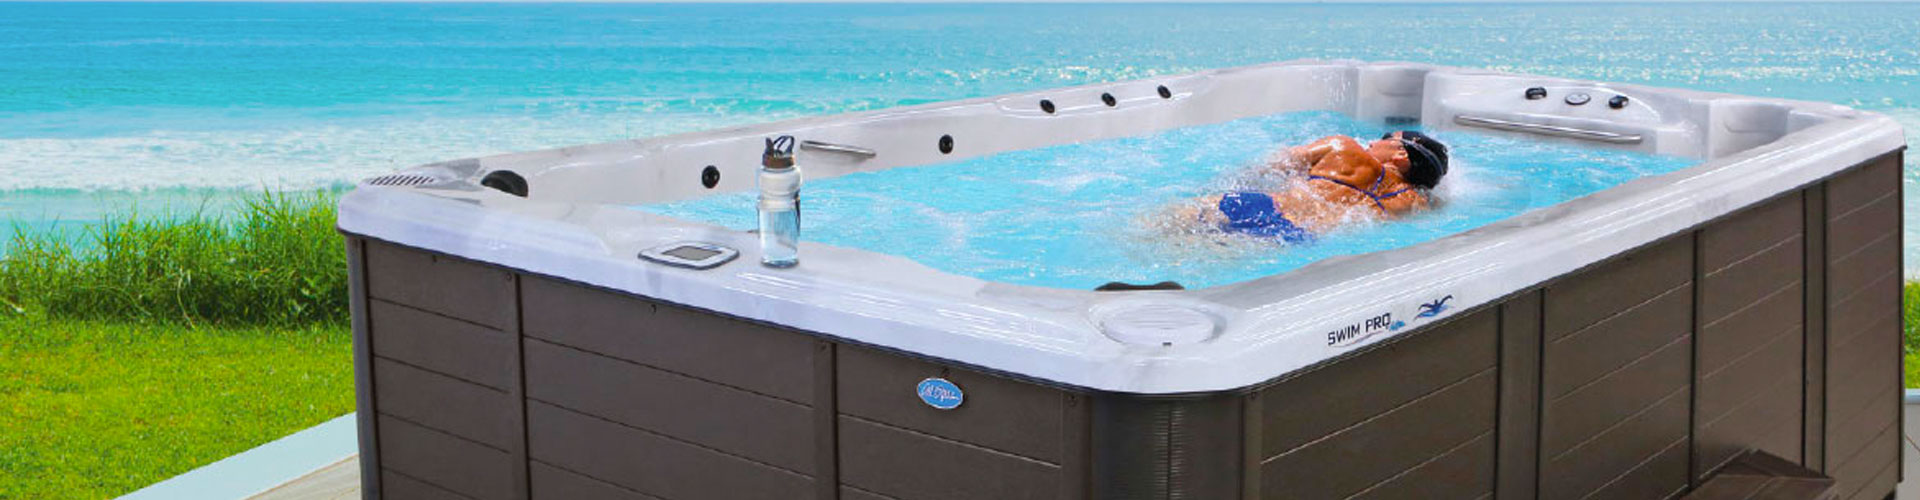 Request Hot Tub Pricing